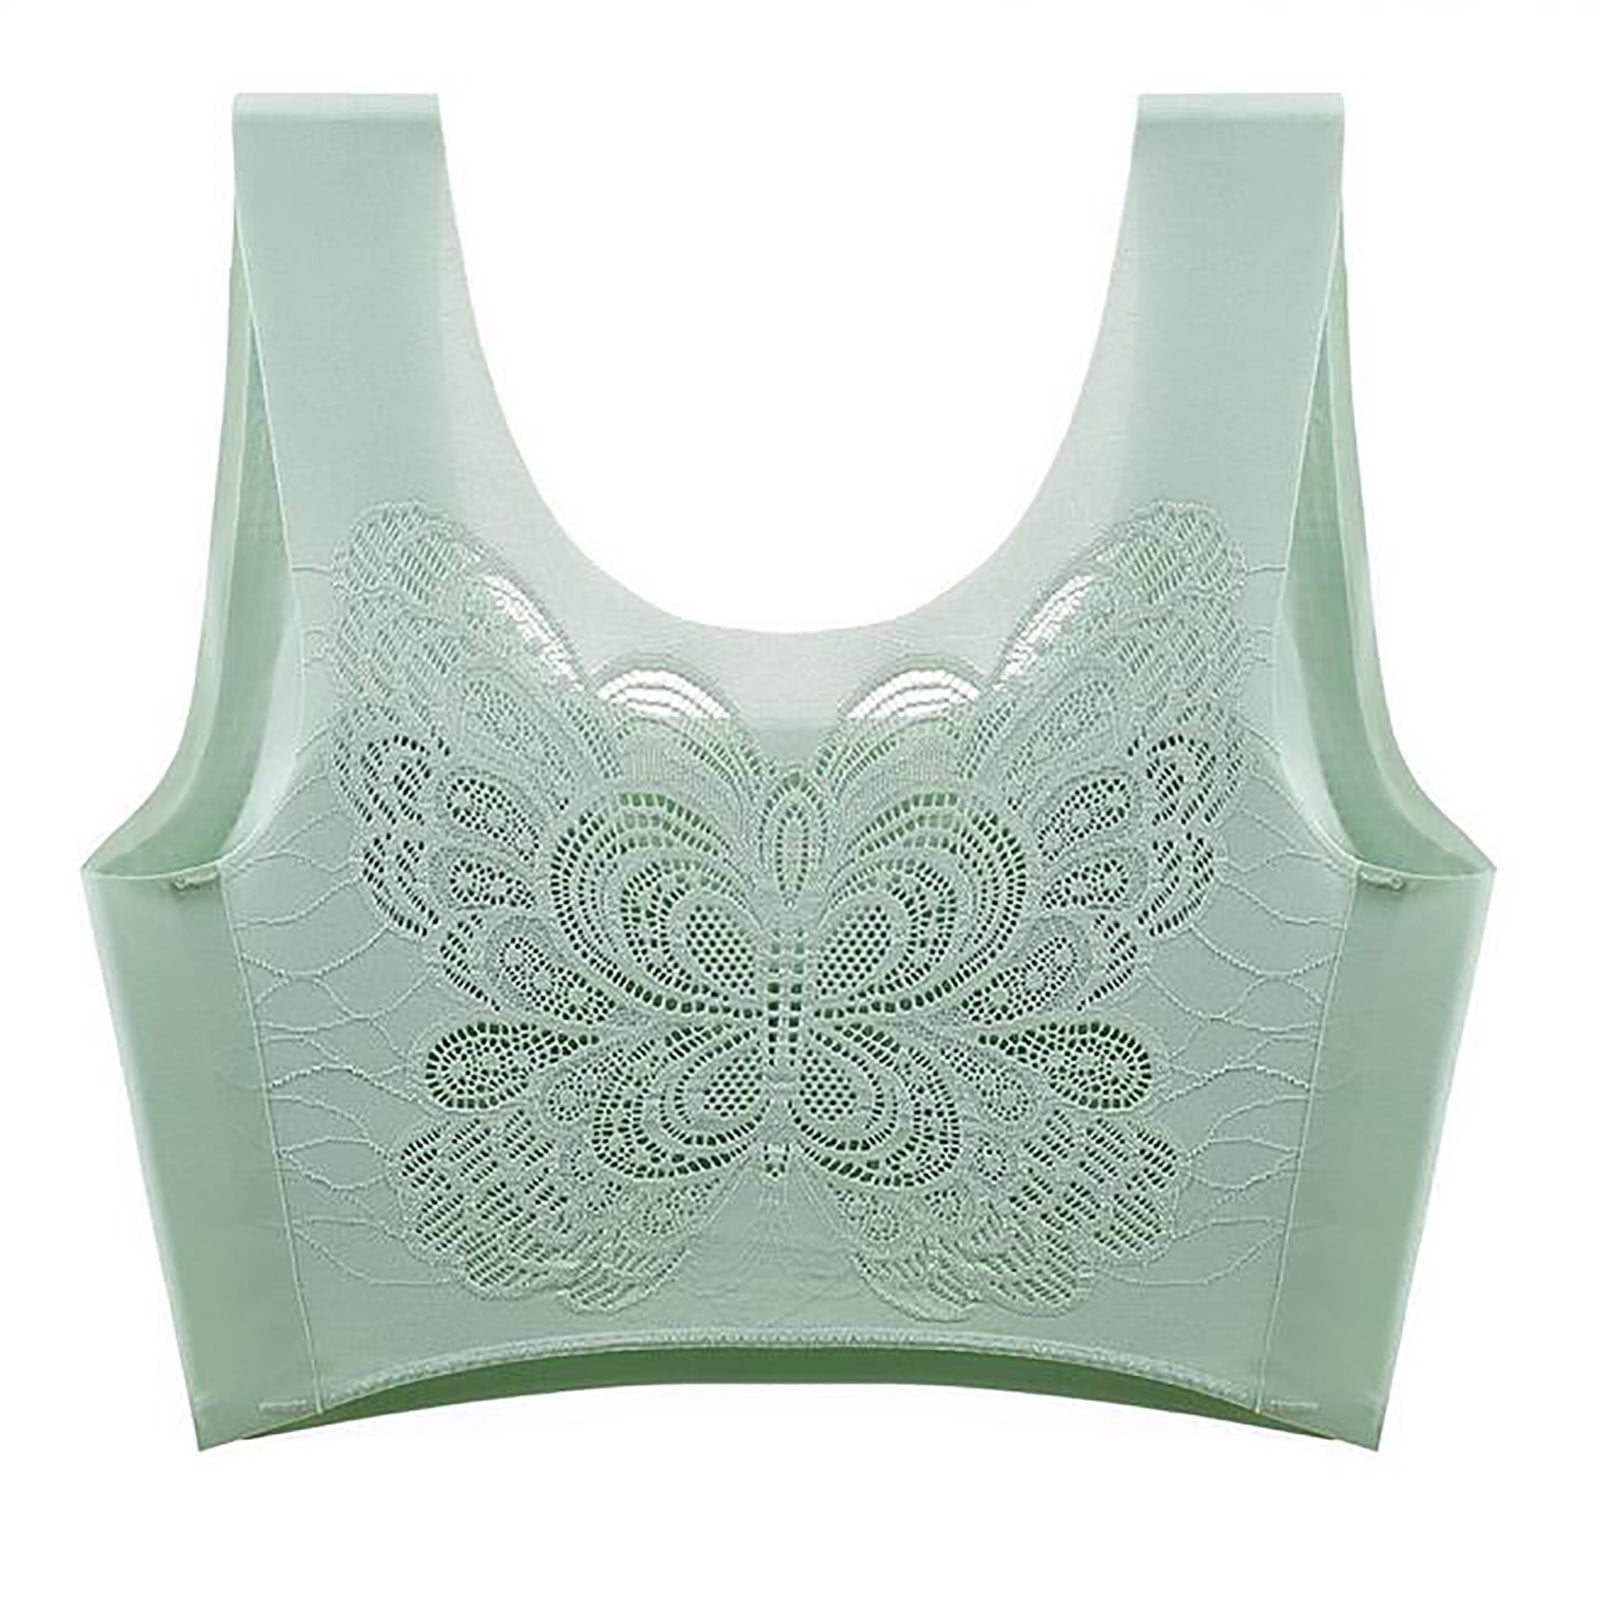 UP TO 15% OFF! Women's Lace Butterfly Back Comfort Revolution Easylite  Seamless Wireless Bra, Green, XL Average